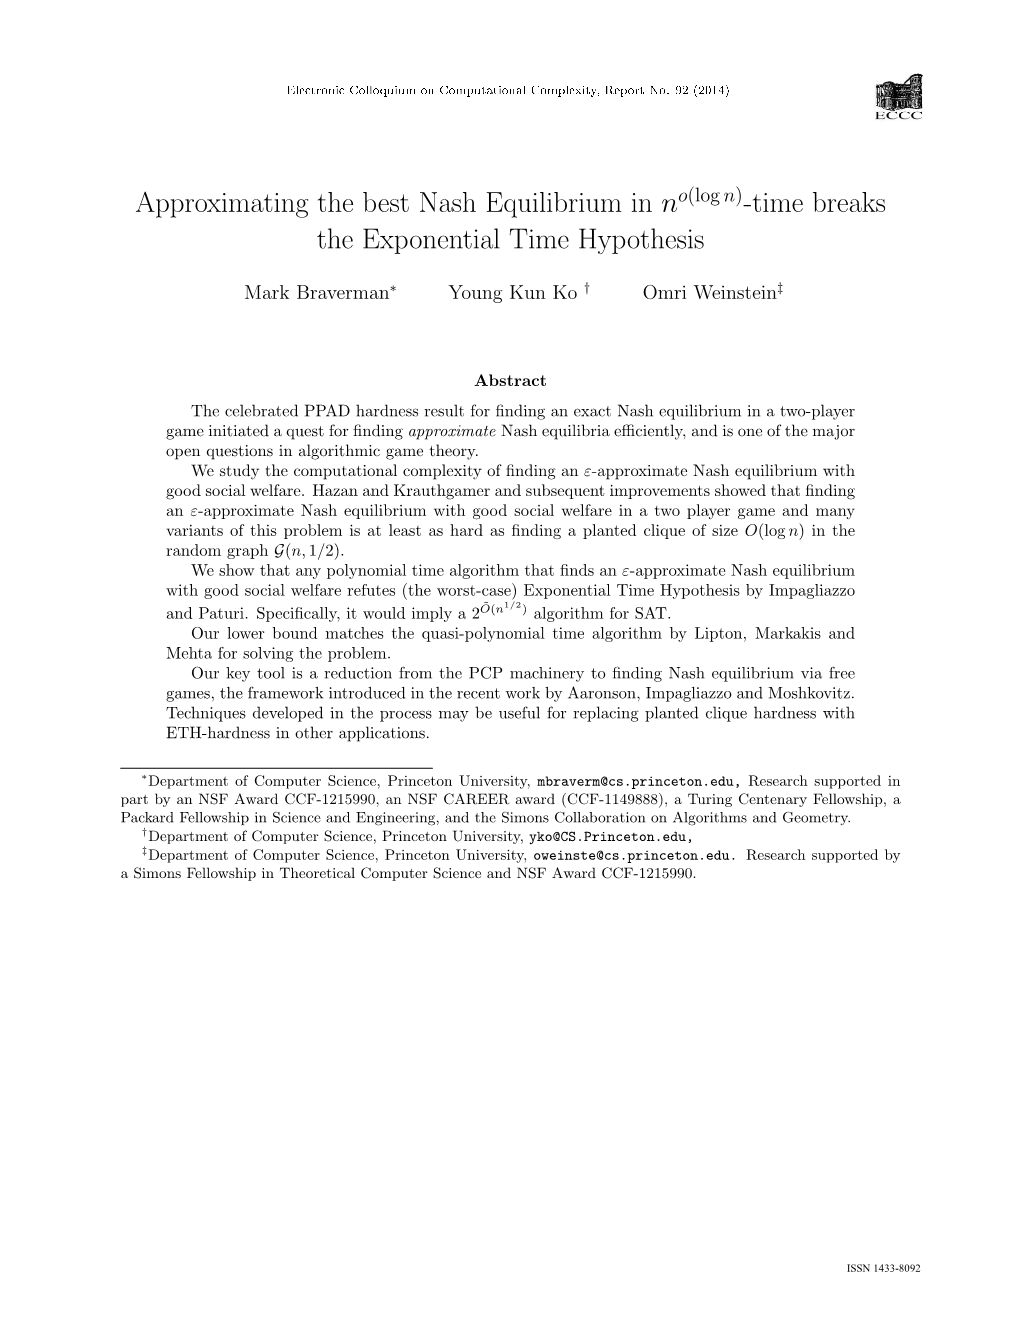 Approximating the Best Nash Equilibrium in No(Log N)-Time Breaks the Exponential Time Hypothesis